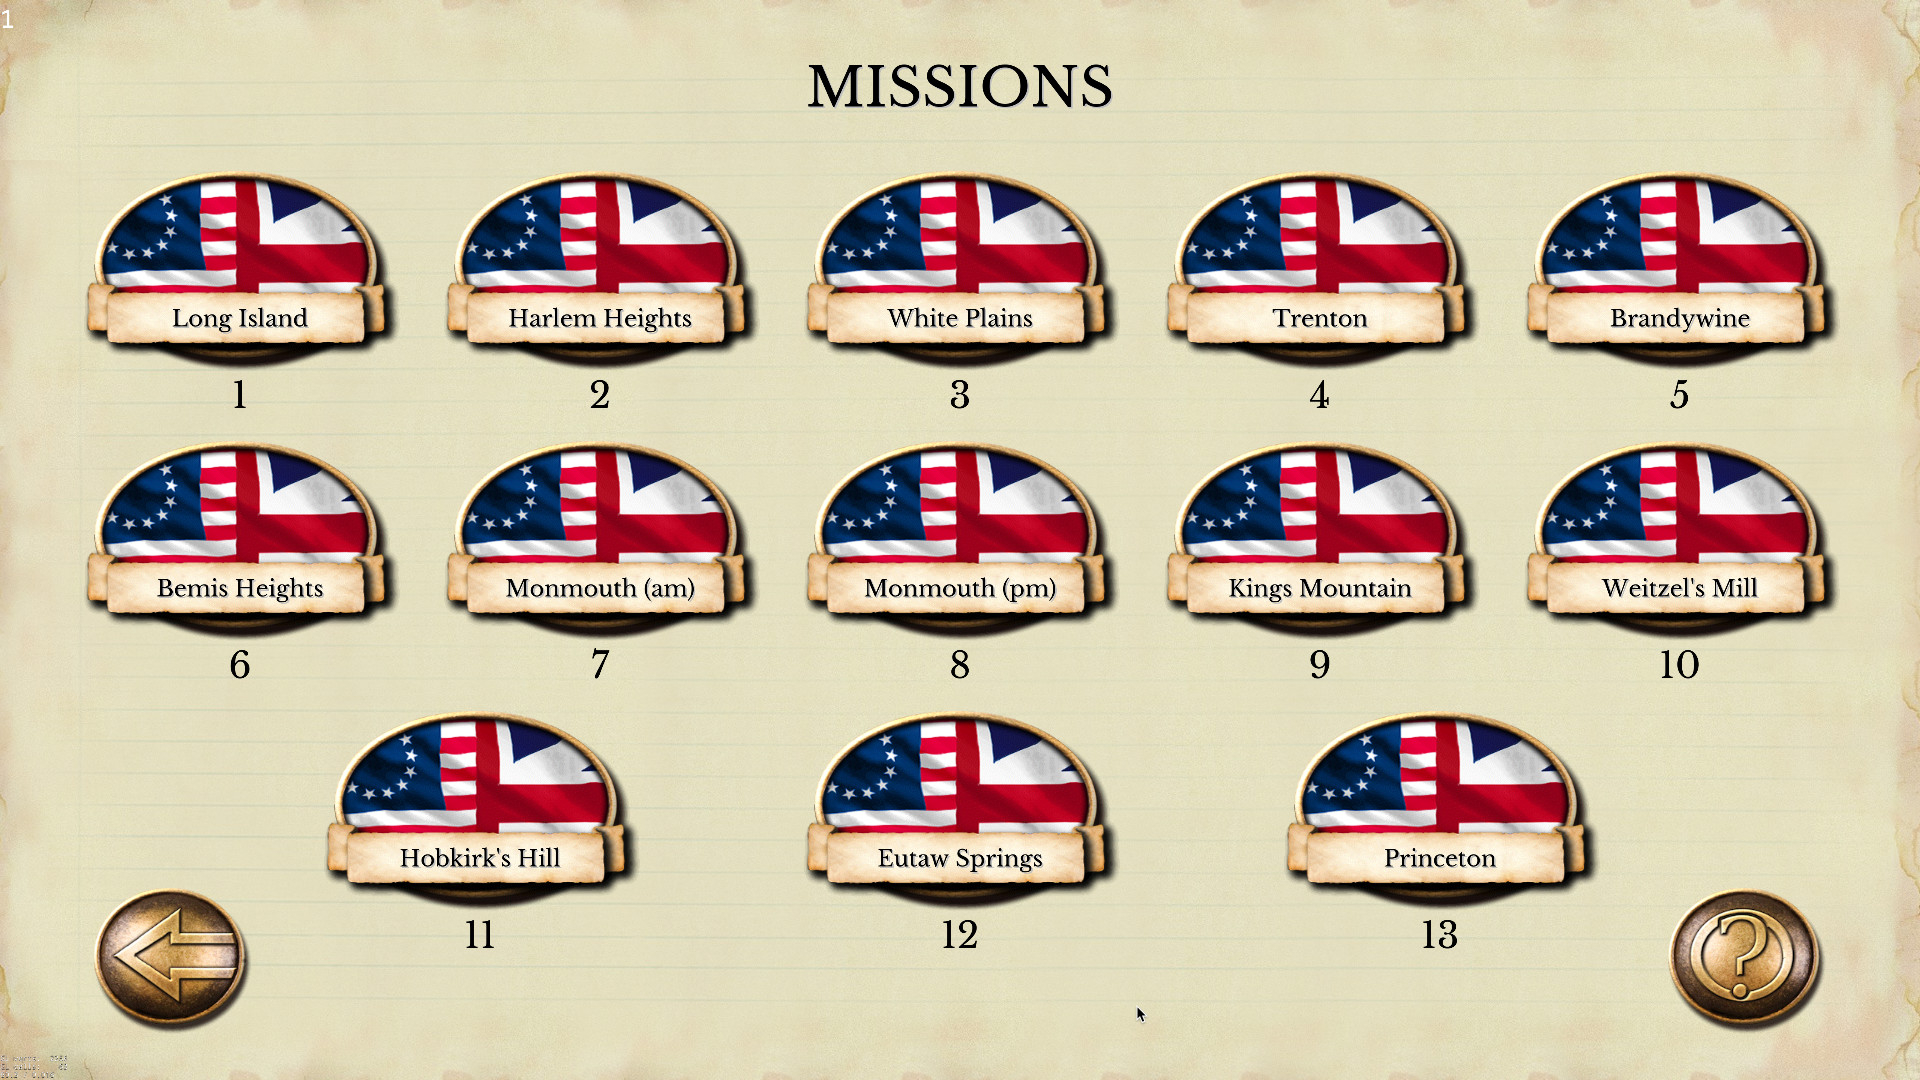 Hold the Line: The American Revolution screenshot